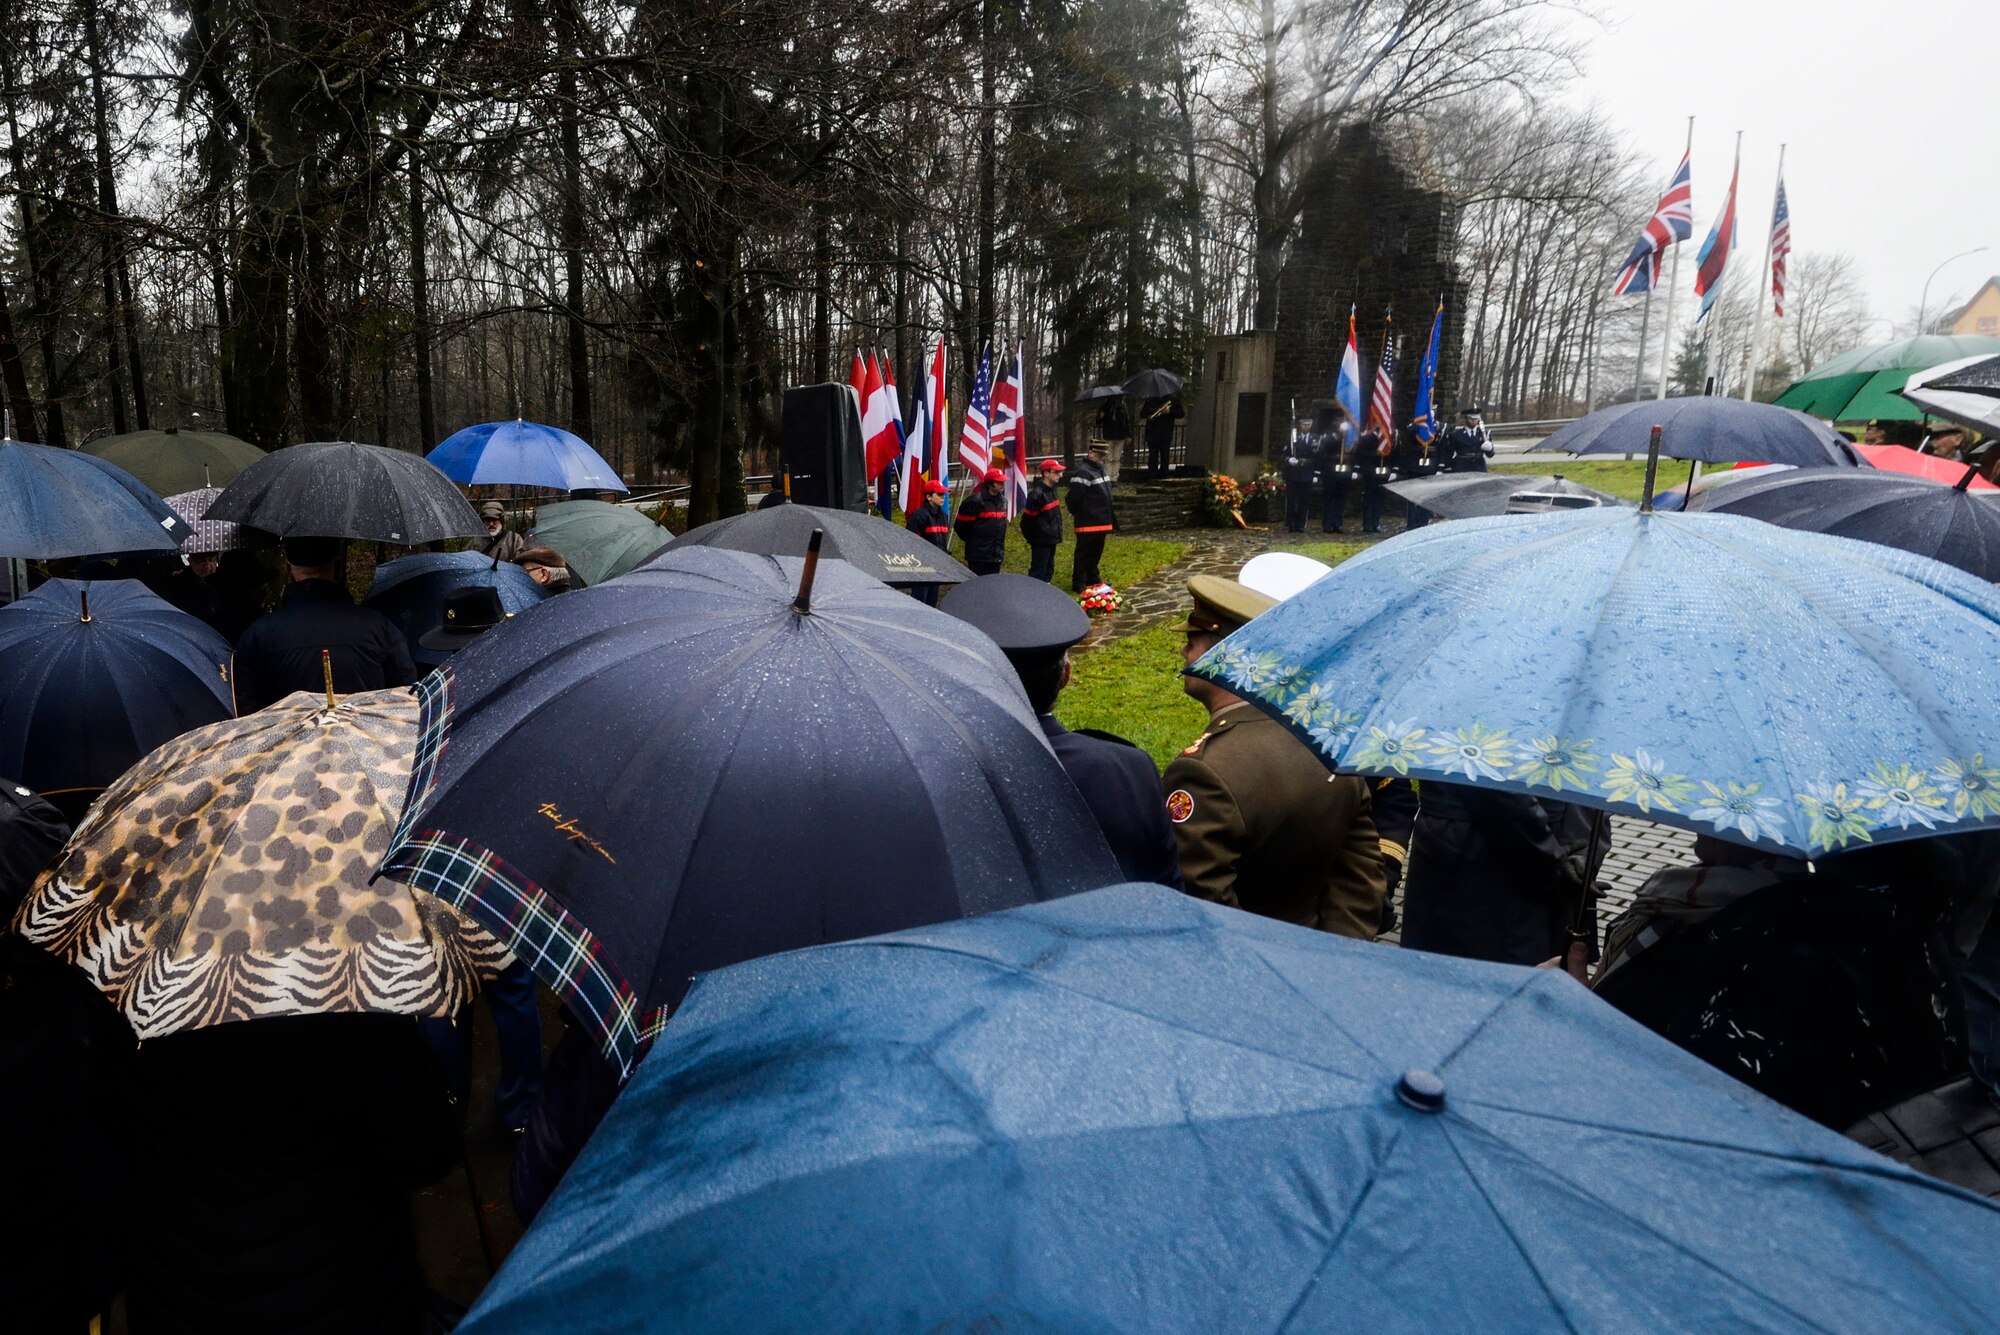 More than 50 spectators hold up umbrellas during a Battle of the Bulge anniversary ceremony at the National Liberation Memorial in Schumanns Eck, Luxembourg, Dec. 16, 2015. The community erected the memorial in 1994 to commemorate the 50th anniversary of the Battle of the Bulge. (U.S. Air Force photo by Staff Sgt. Christopher Ruano/Released)